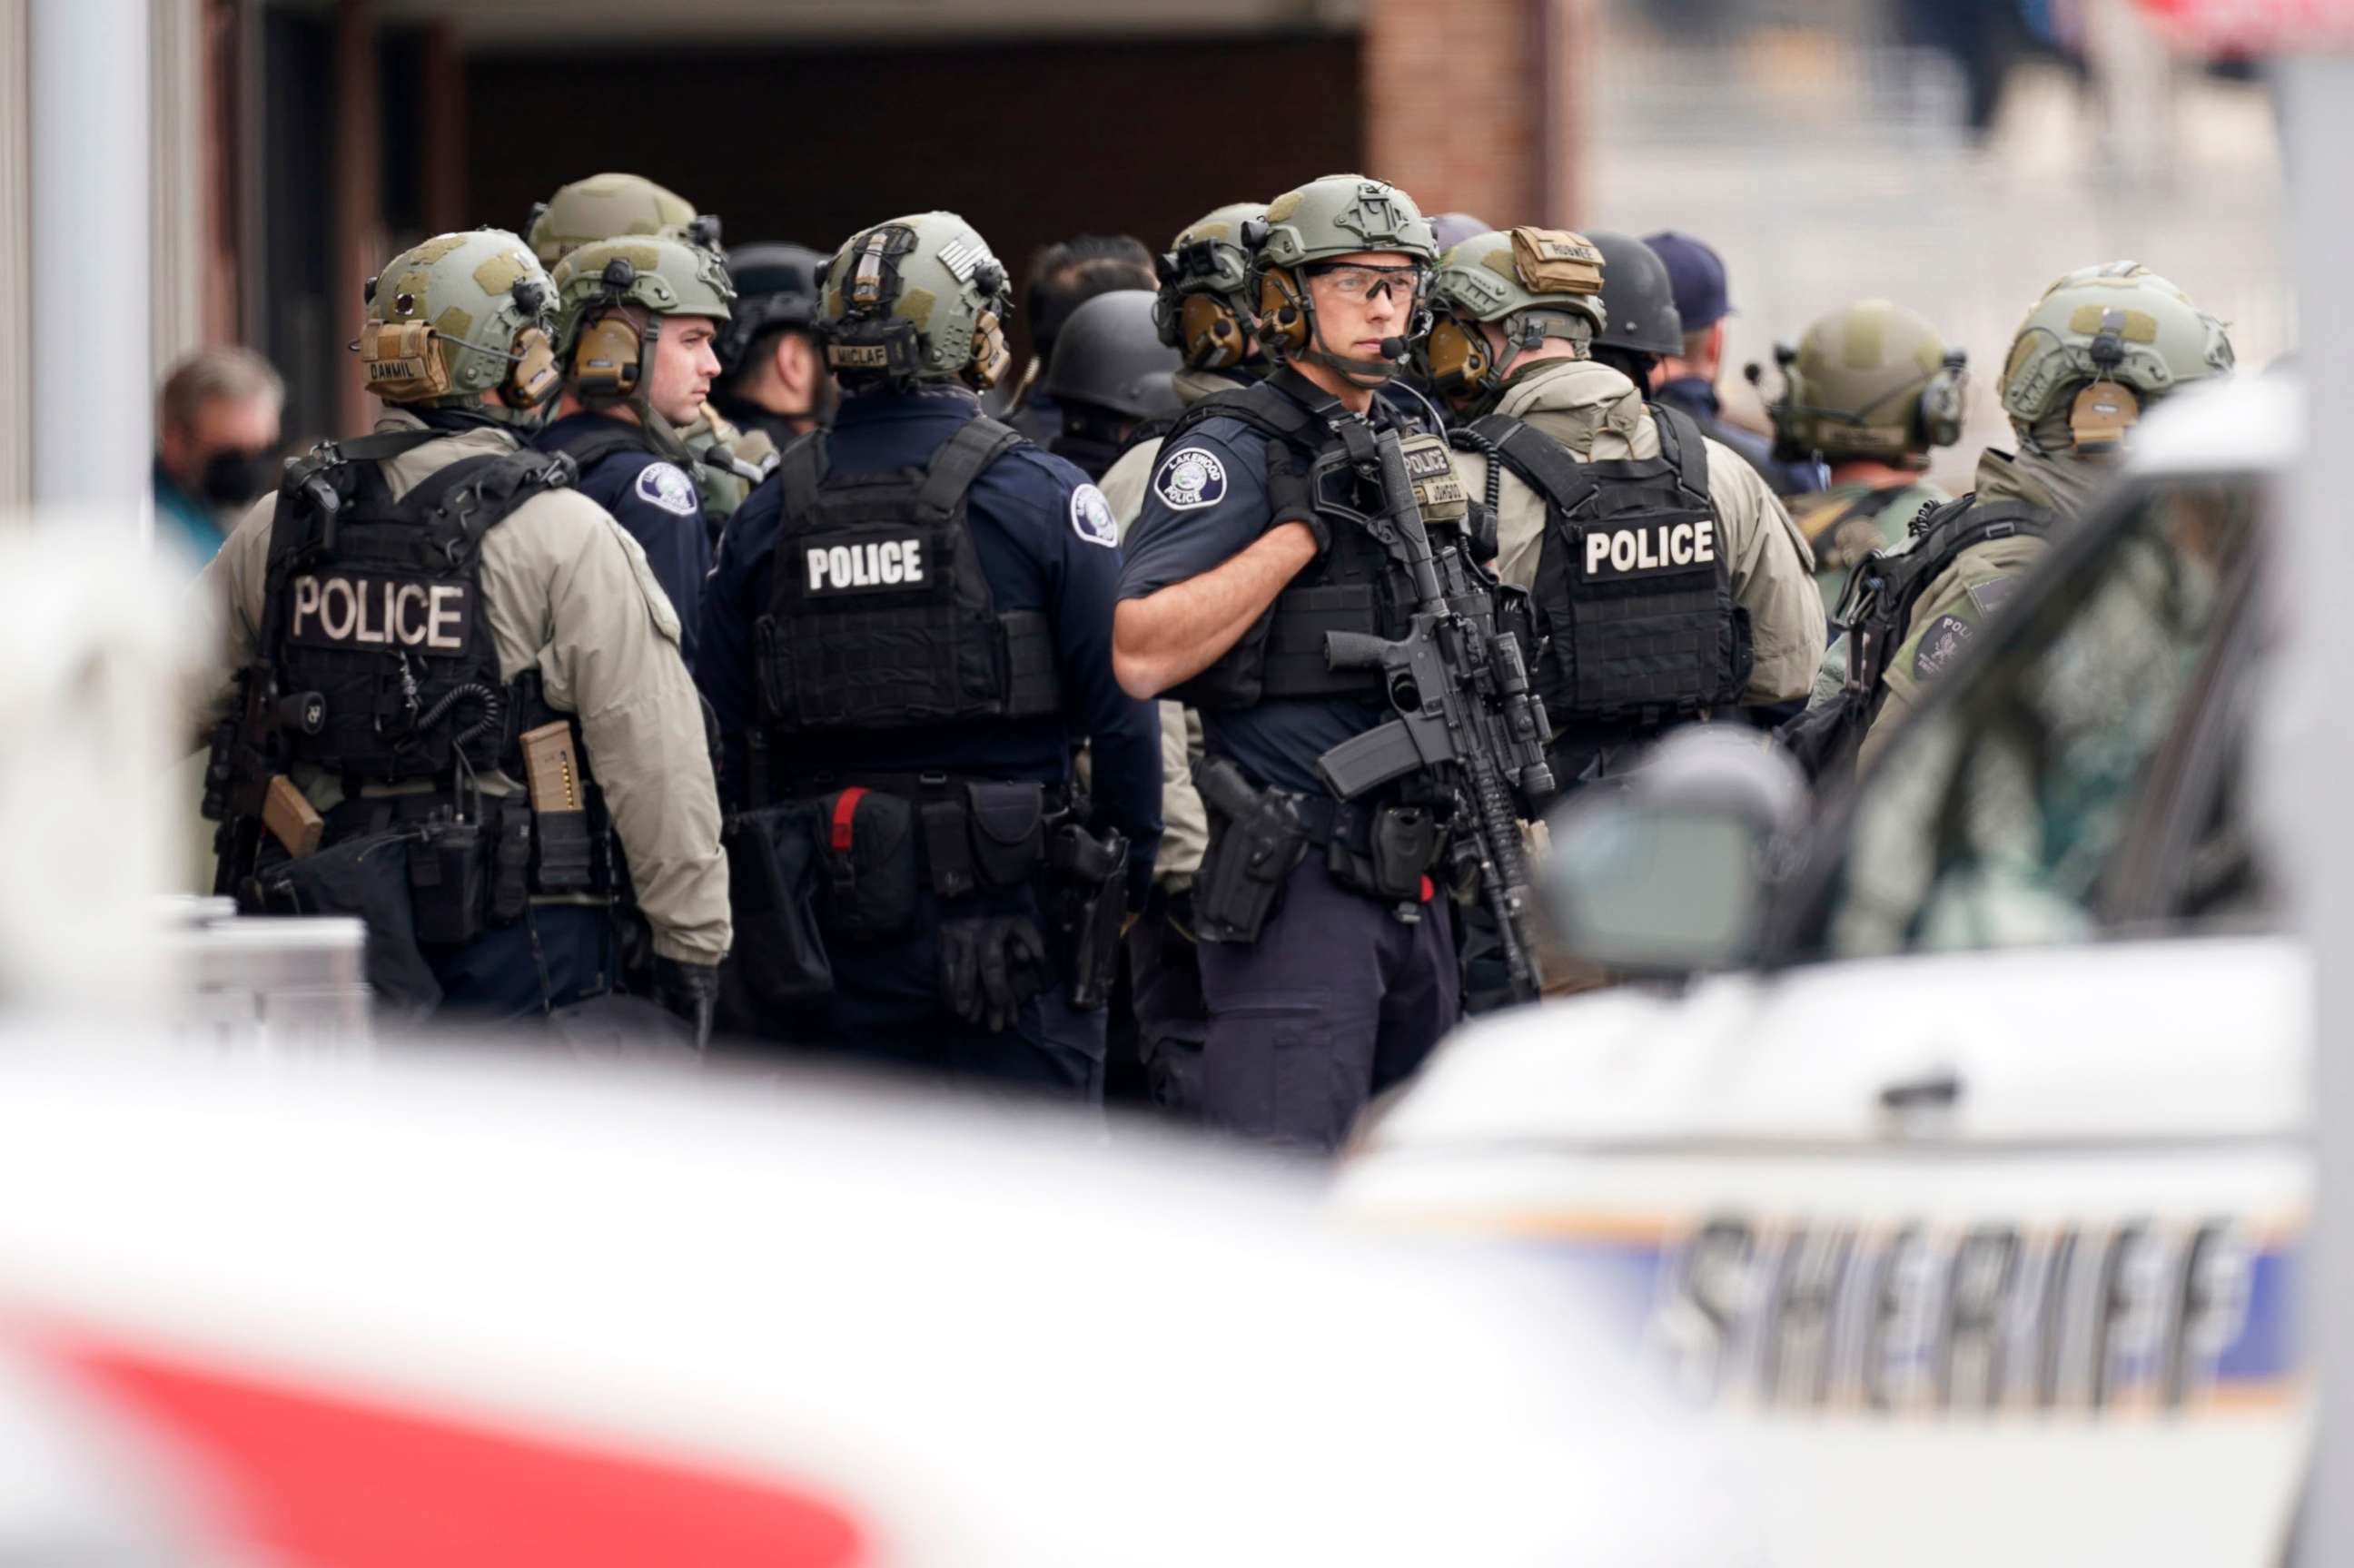 PHOTO: Police outside a King Soopers grocery store where a shooting took place March 22, 2021, in Boulder, Colo.